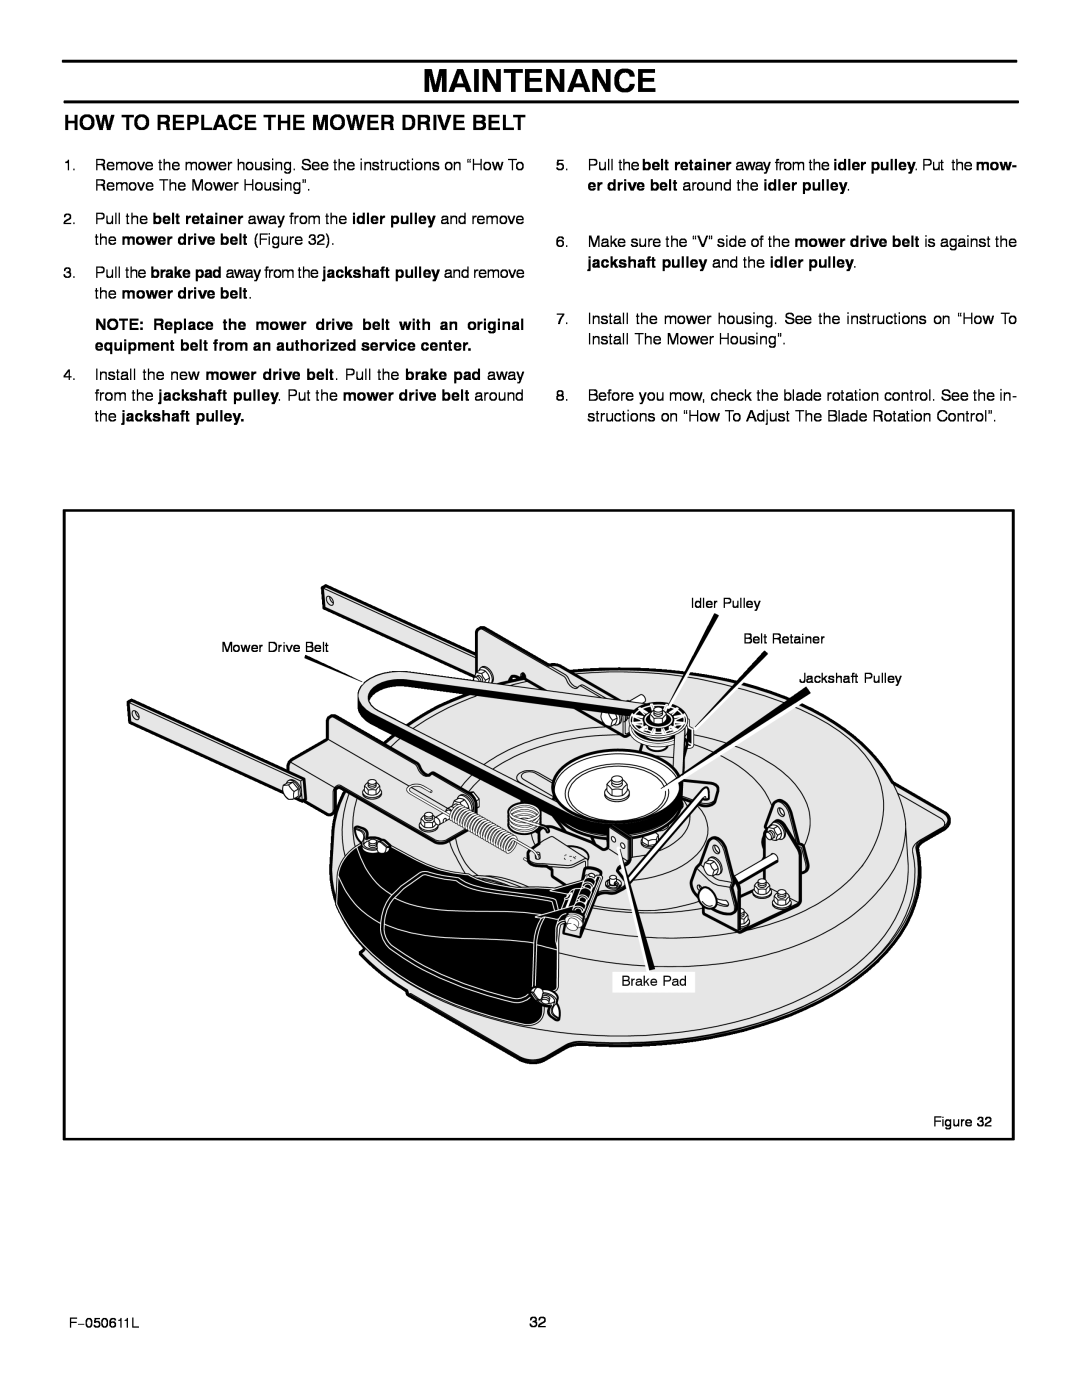 Murray 309007x8B manual How To Replace The Mower Drive Belt, Maintenance 